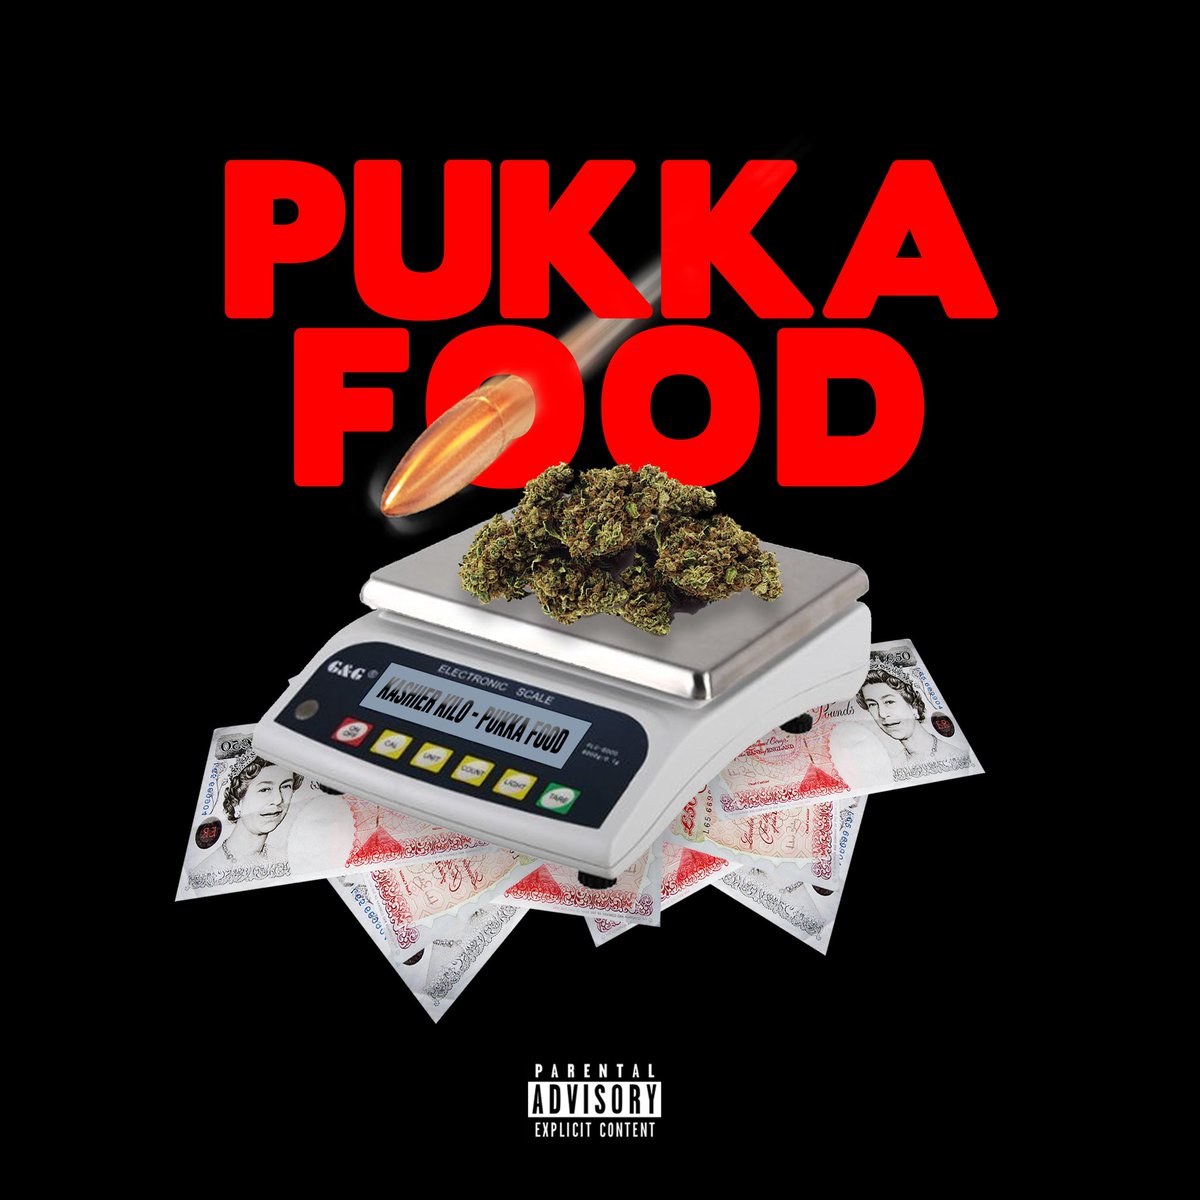 Designed this cover art for @kashierkilo - Entitled ‘Pukka Food’•
• @fumeztheengineer 🎛🔋
•
•Tags:
#cover #coverart #money #music #graphicdesign #graphicdesigner #artwork #albumcover #albumartwork #coverartmatters #artist #singlecovers #soundcloud #spotify